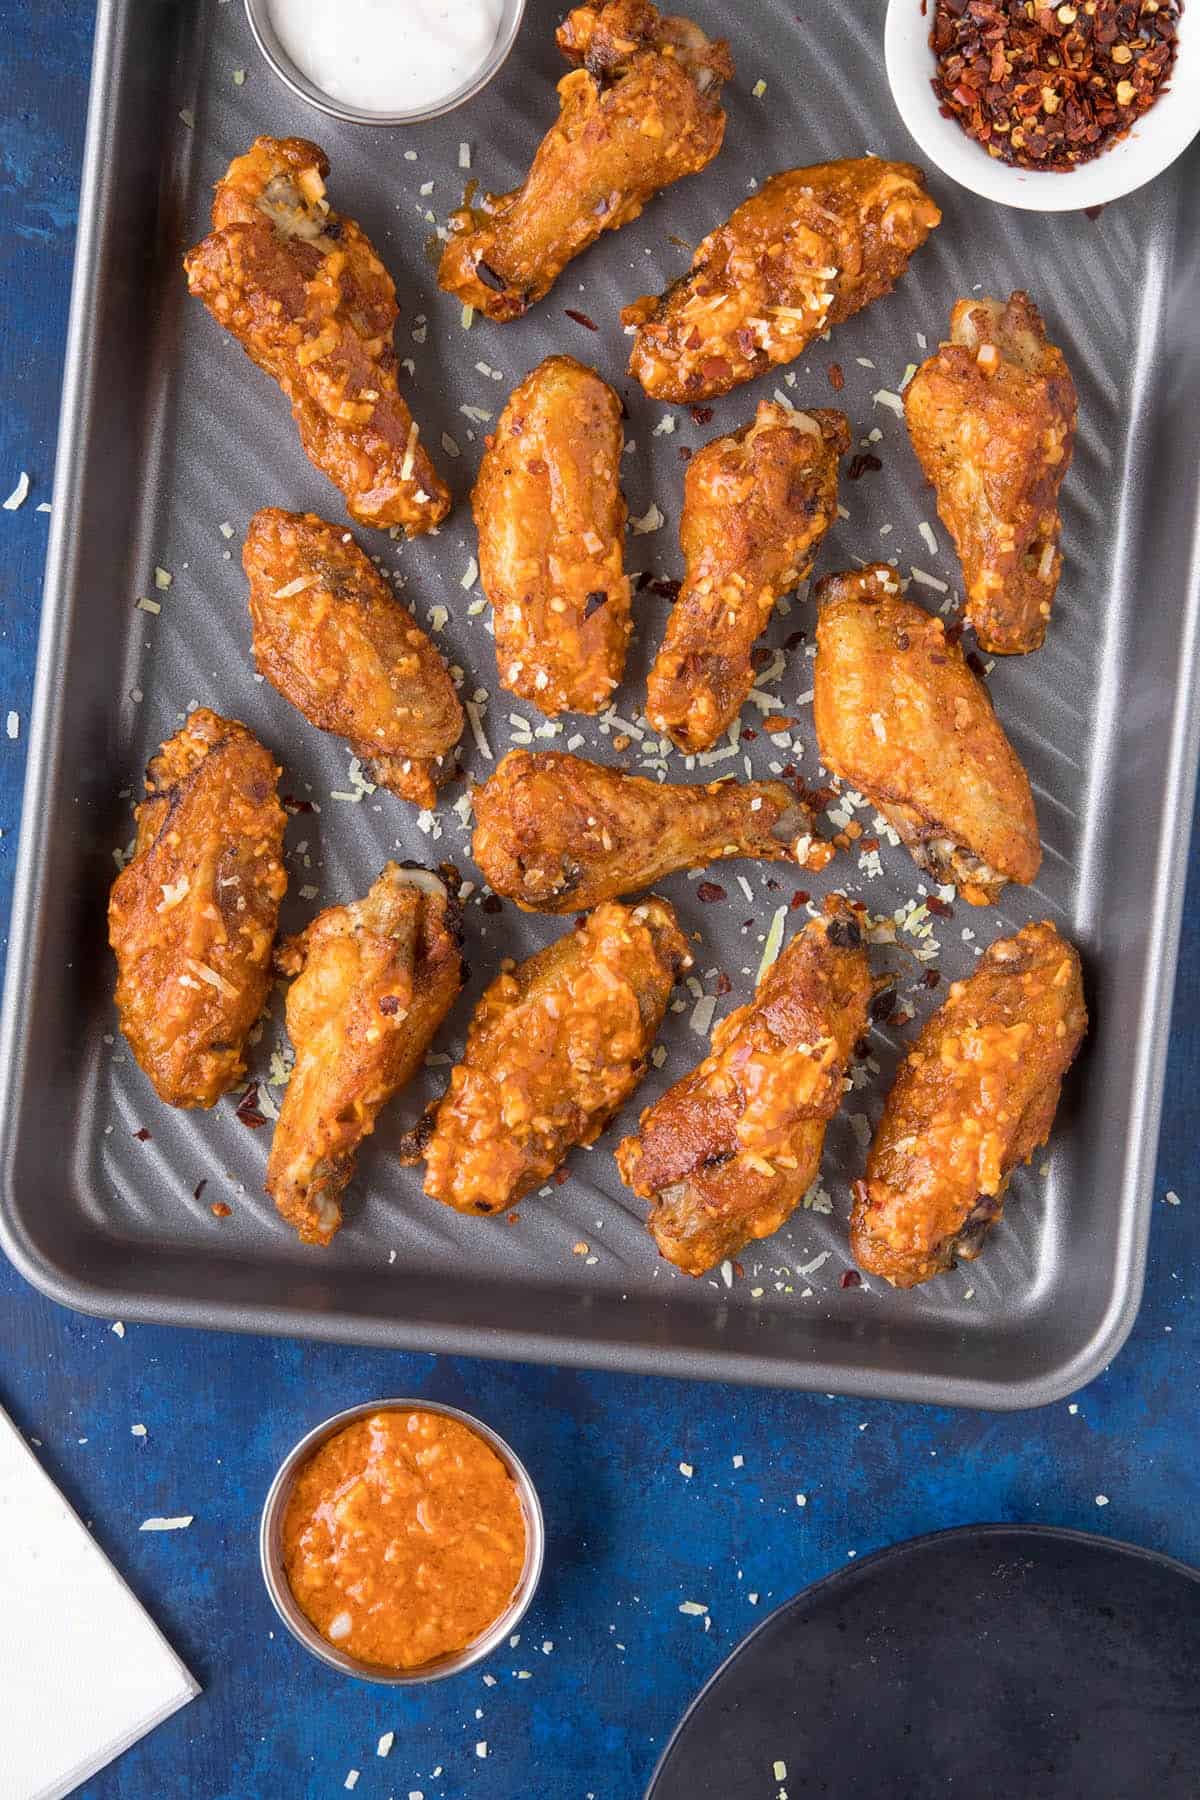 Garlic Parmesan Chicken Wings - in a pan, ready to serve.